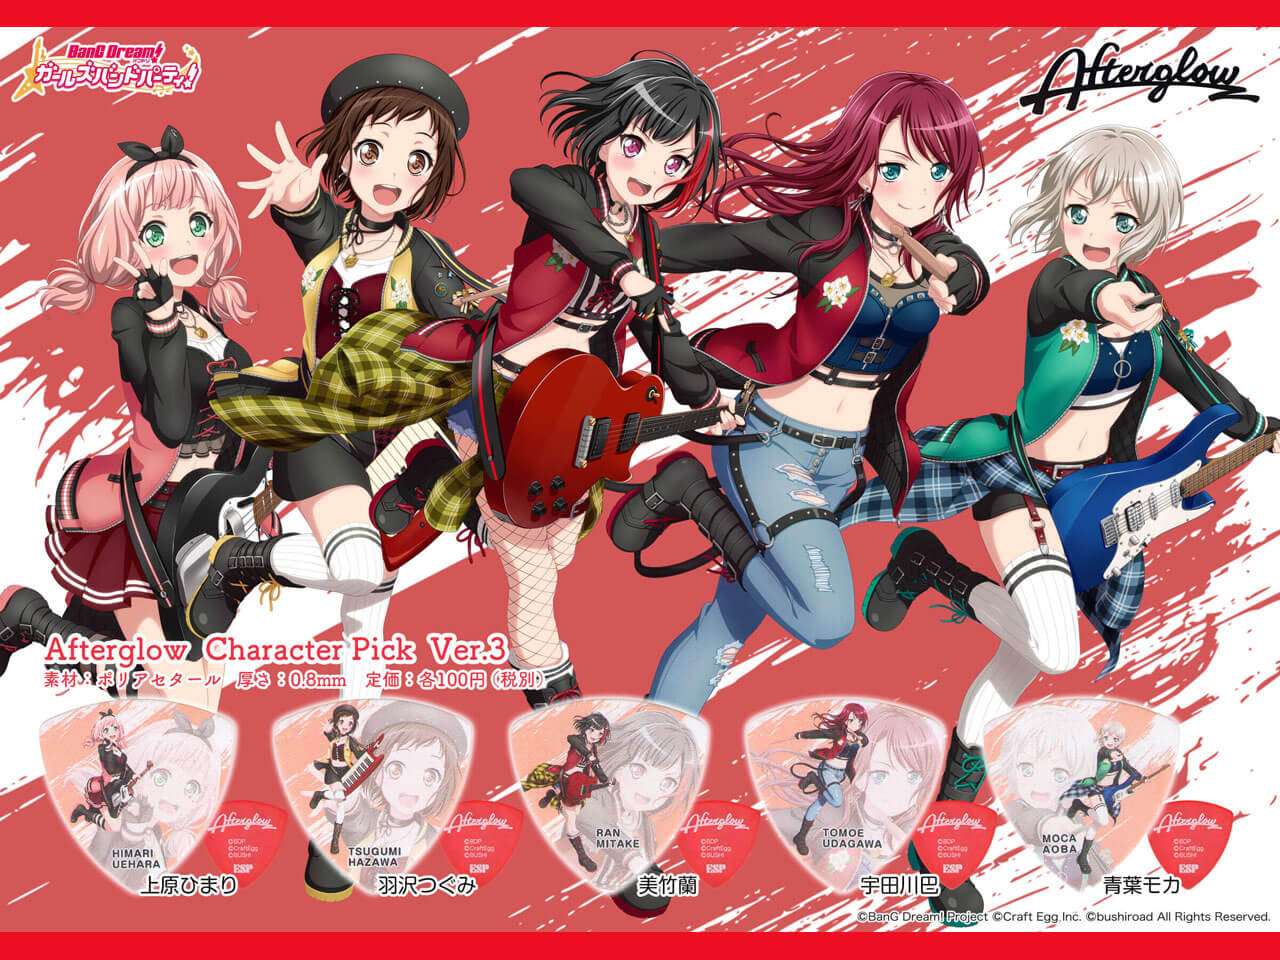 【ESP×BanG Dream!コラボピック】Afterglow Character Pick Ver.3 "上原ひまり"（GBP HIMARI AFTERGLOW 3）＆”ハメパチ” セット